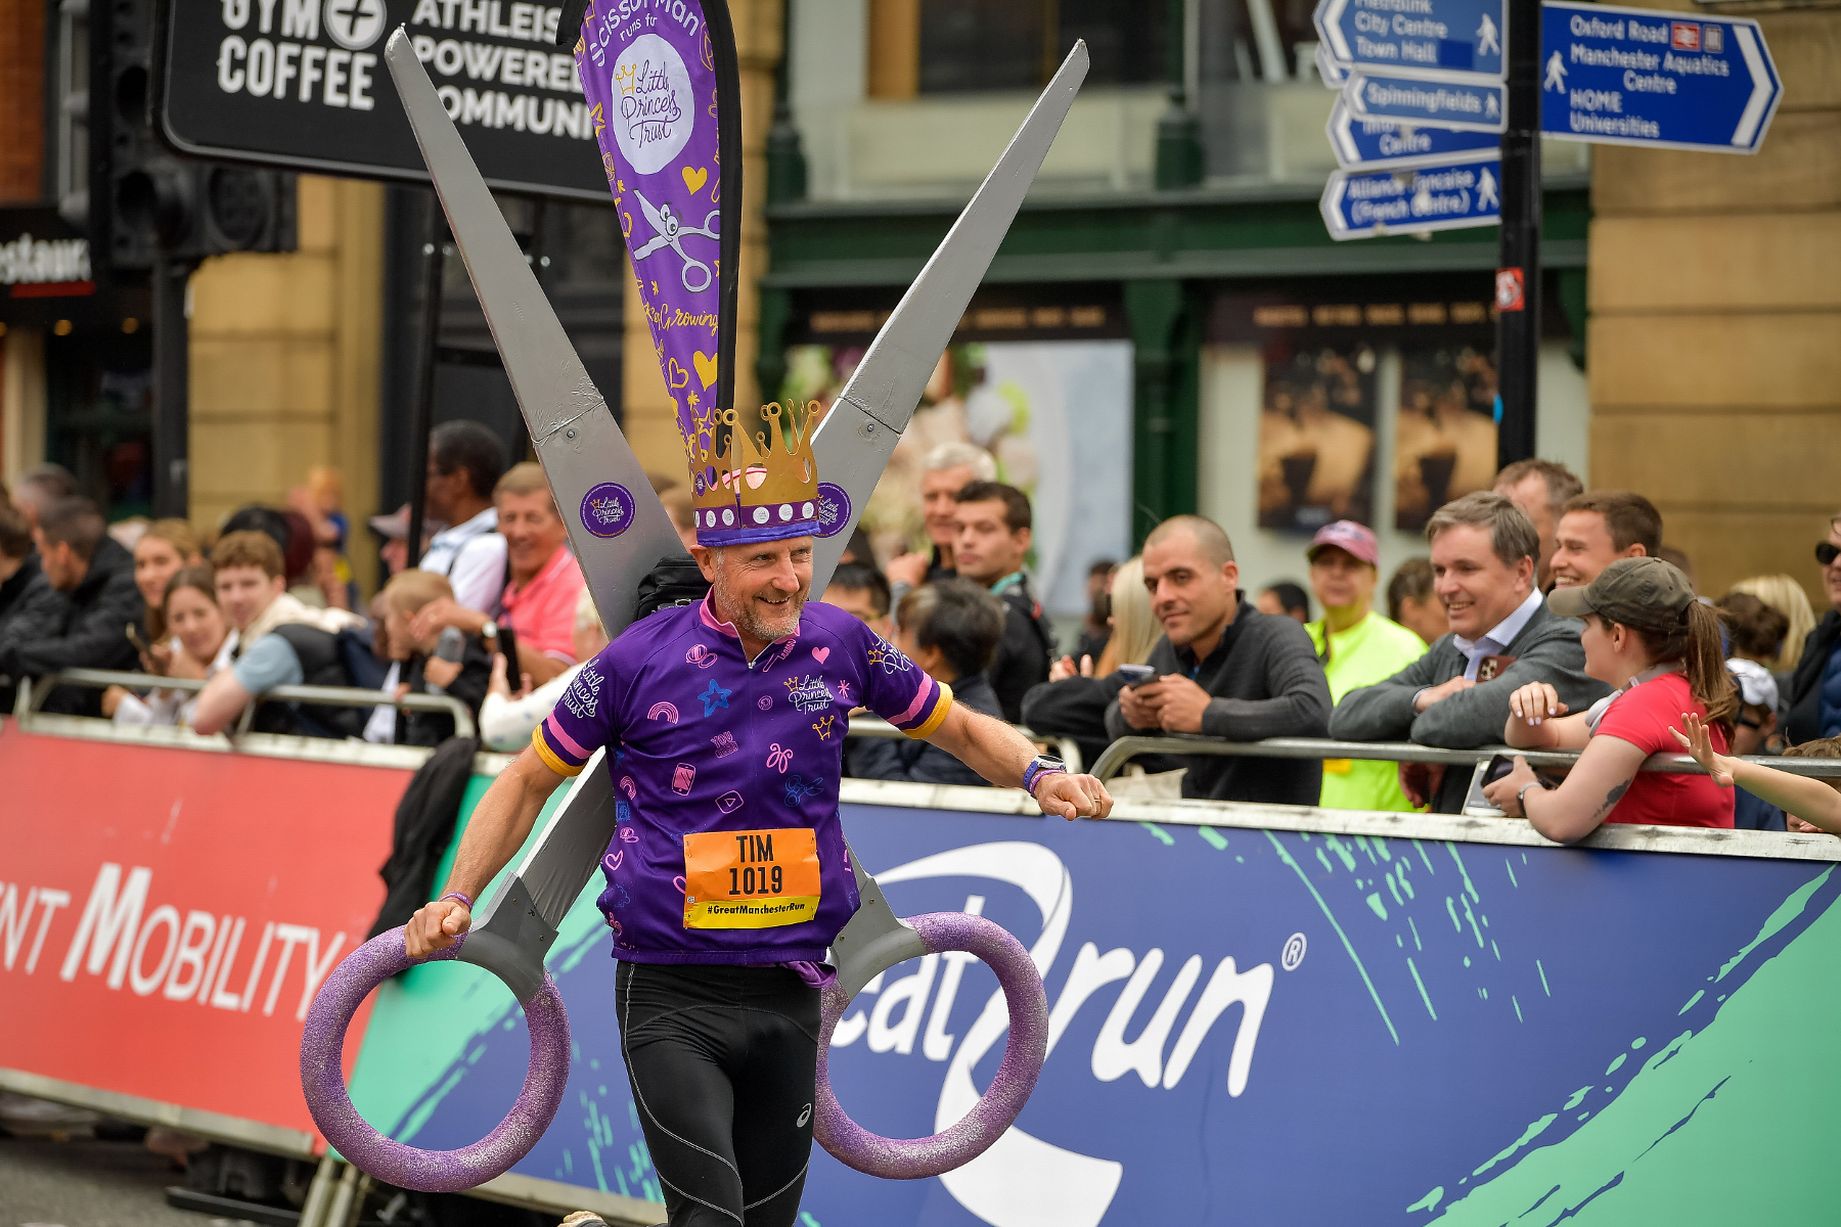 Scissor Man Tim in the Great Manchester Run in a costume designed by Simple Design Works